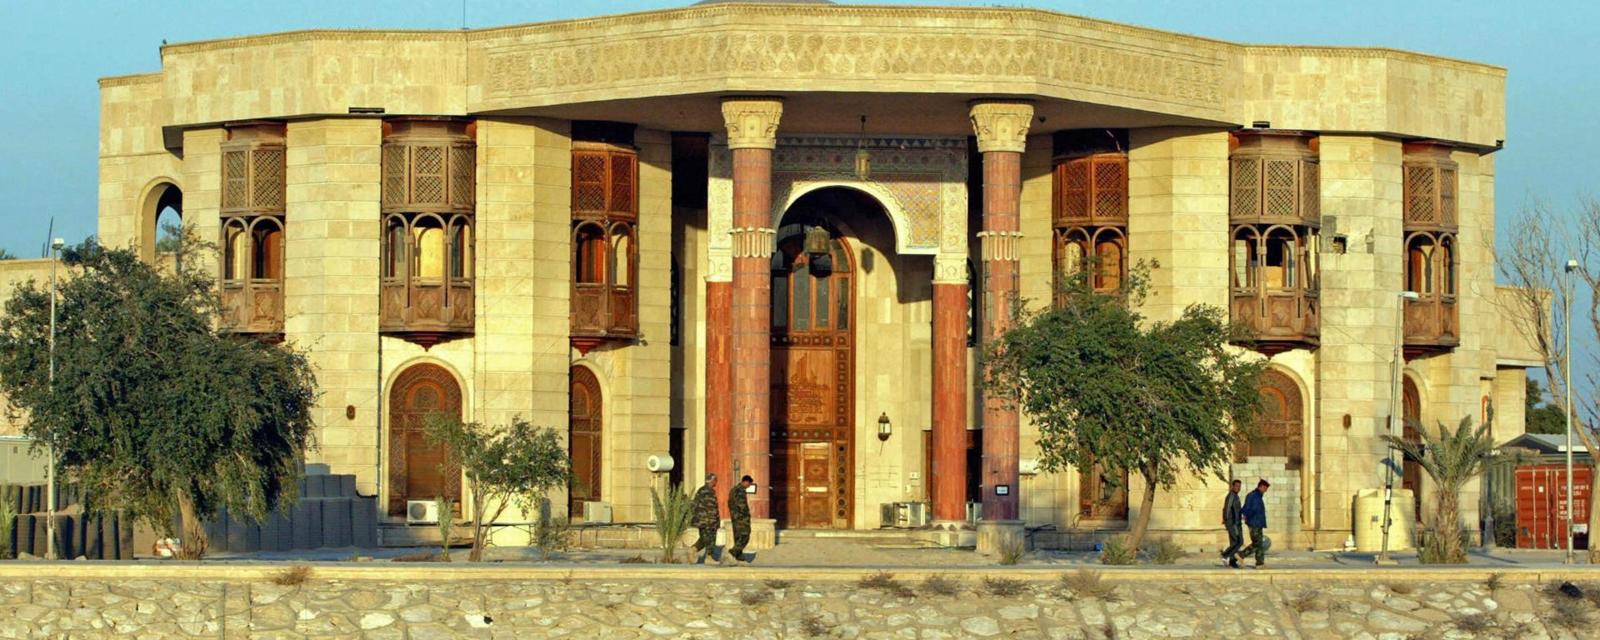 The museum, located in a former palace of Saddam Hussein, is the culmination of an eight-year project (Credit: Essam al-Sudani/Getty Images)